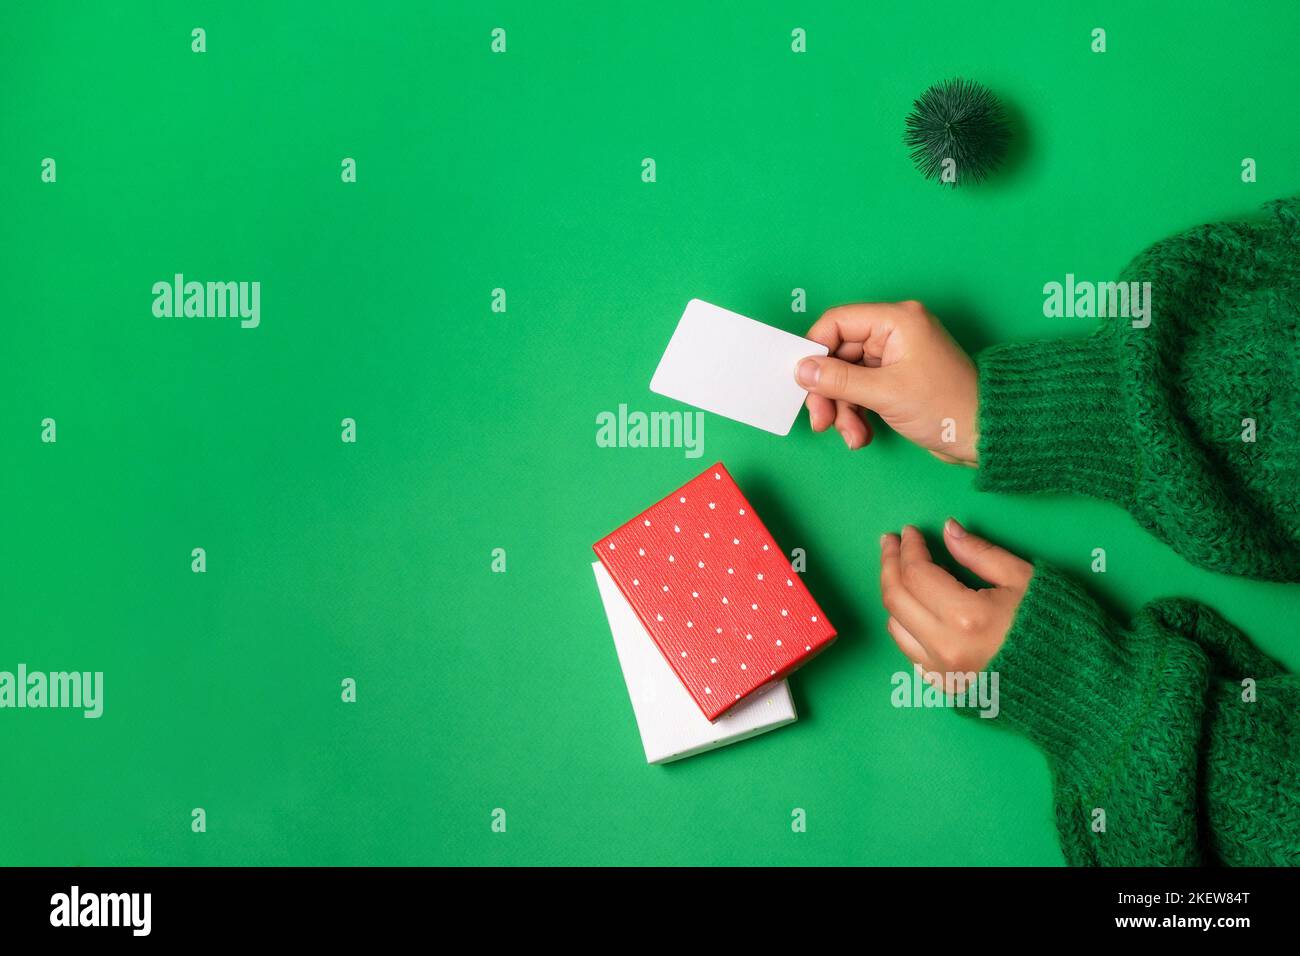 Female hands holding a bonus or credit bank card template for paying for the purchase of gifts in boxes Concept of online shopping and holiday sales. Stock Photo